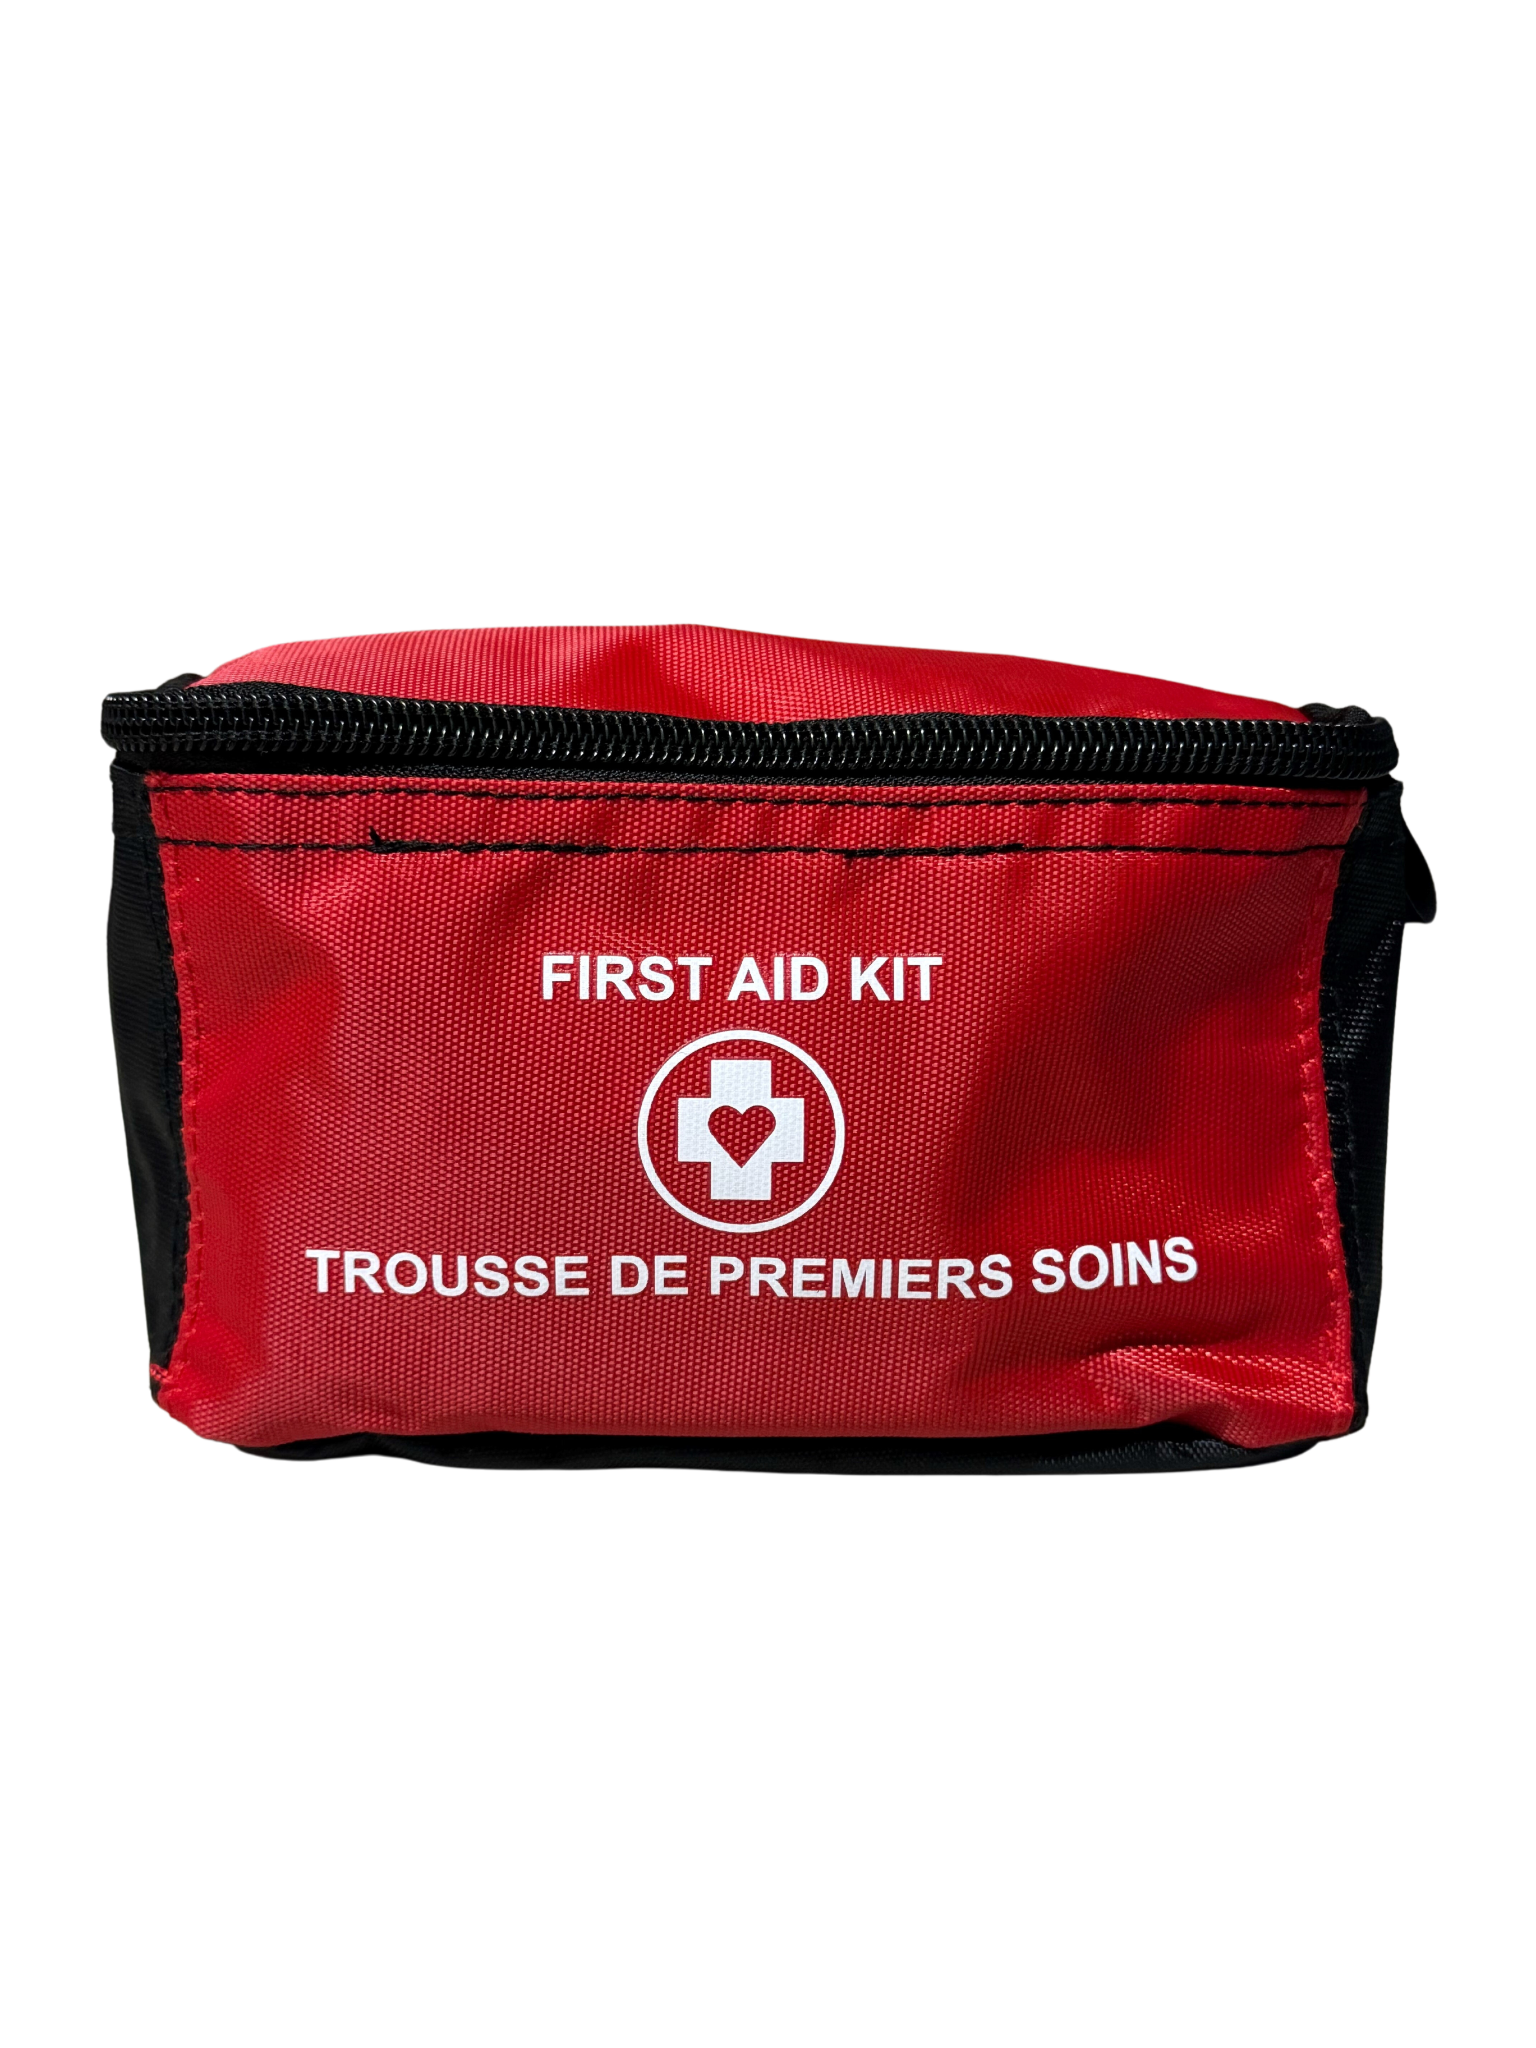 WorkSafeBC Personal First Aid Kit image